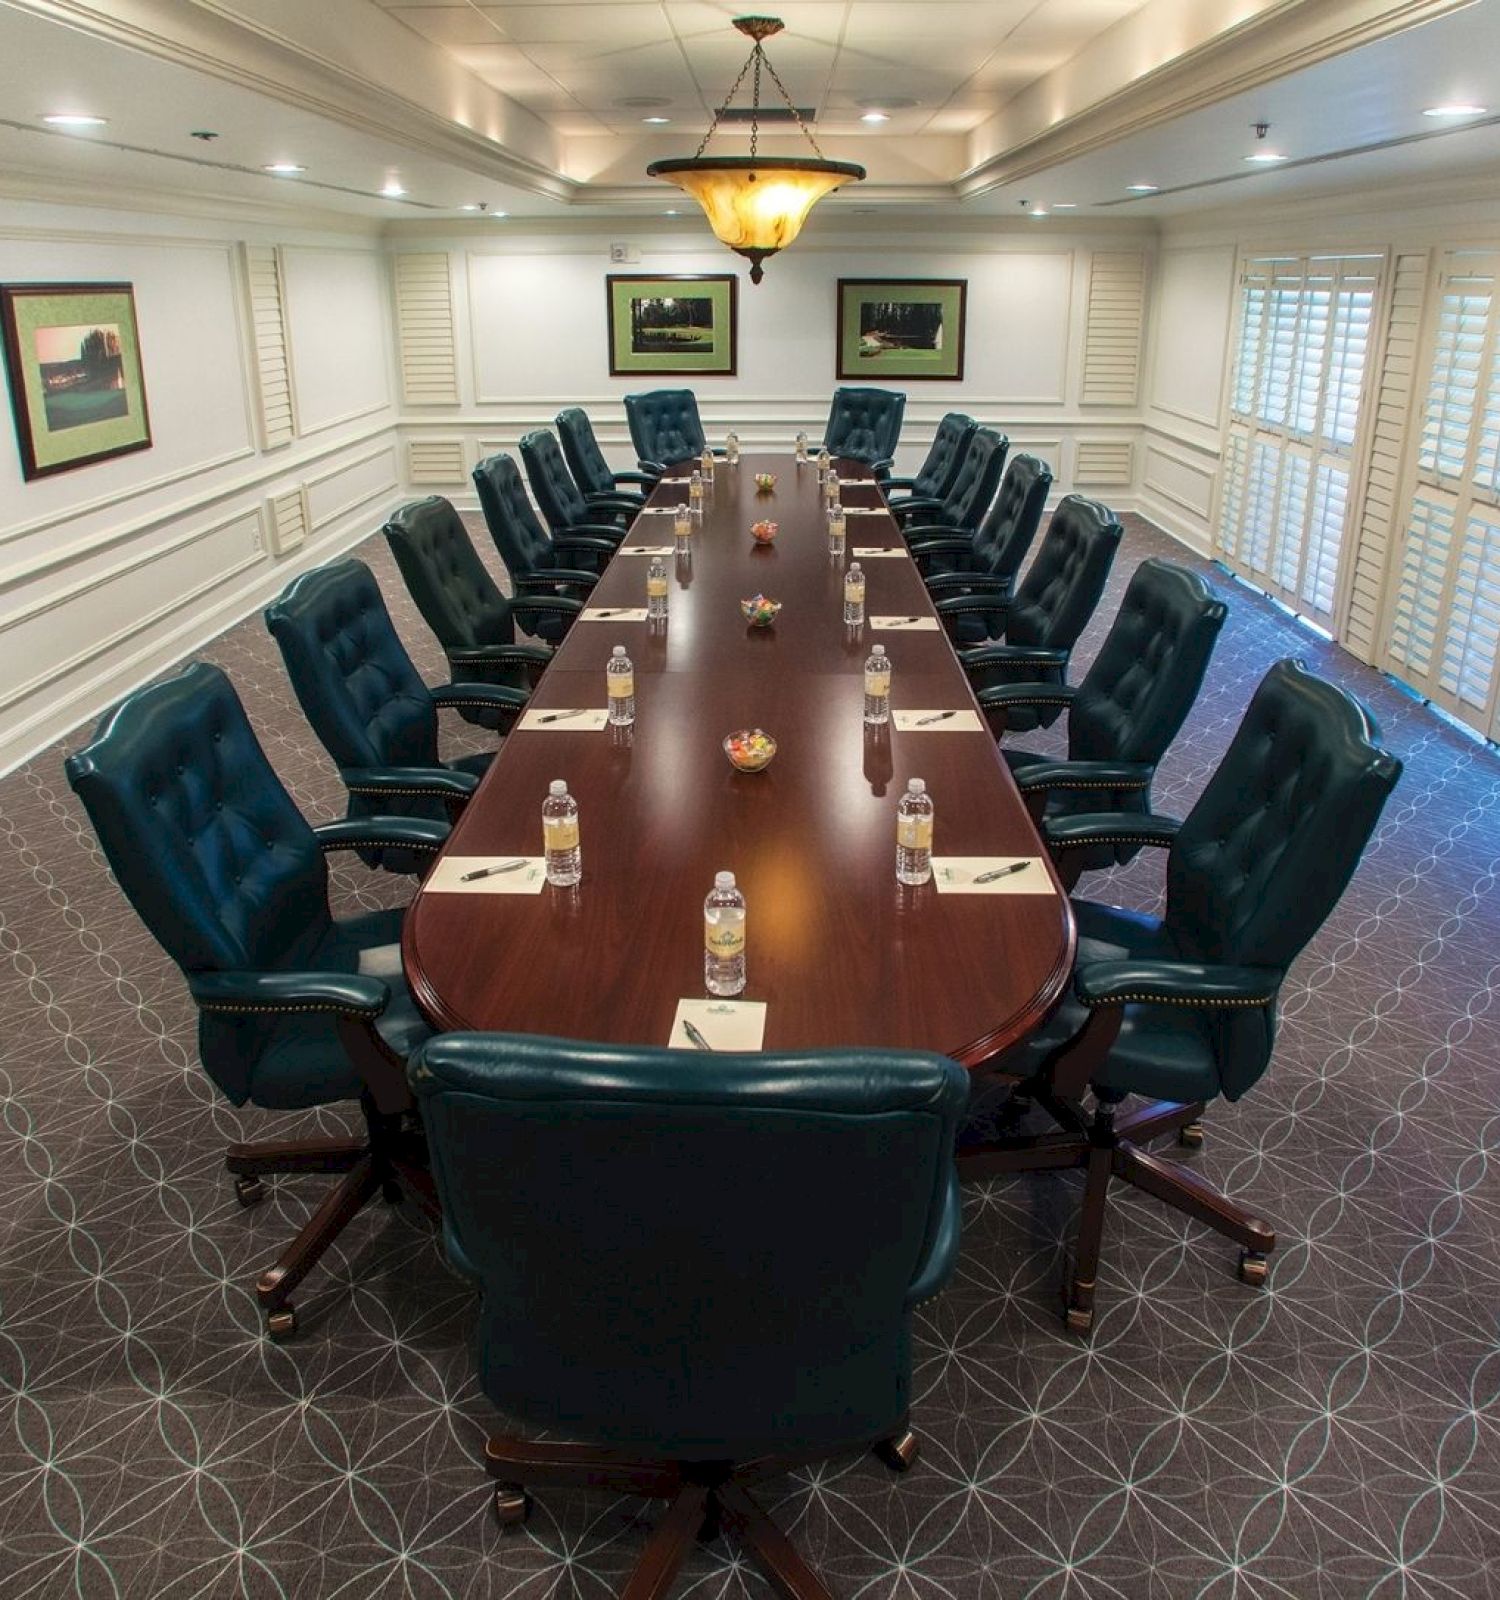 A large conference room with a long table, surrounded by green chairs, water bottles, and notepads set for a meeting. Art decorates the walls.